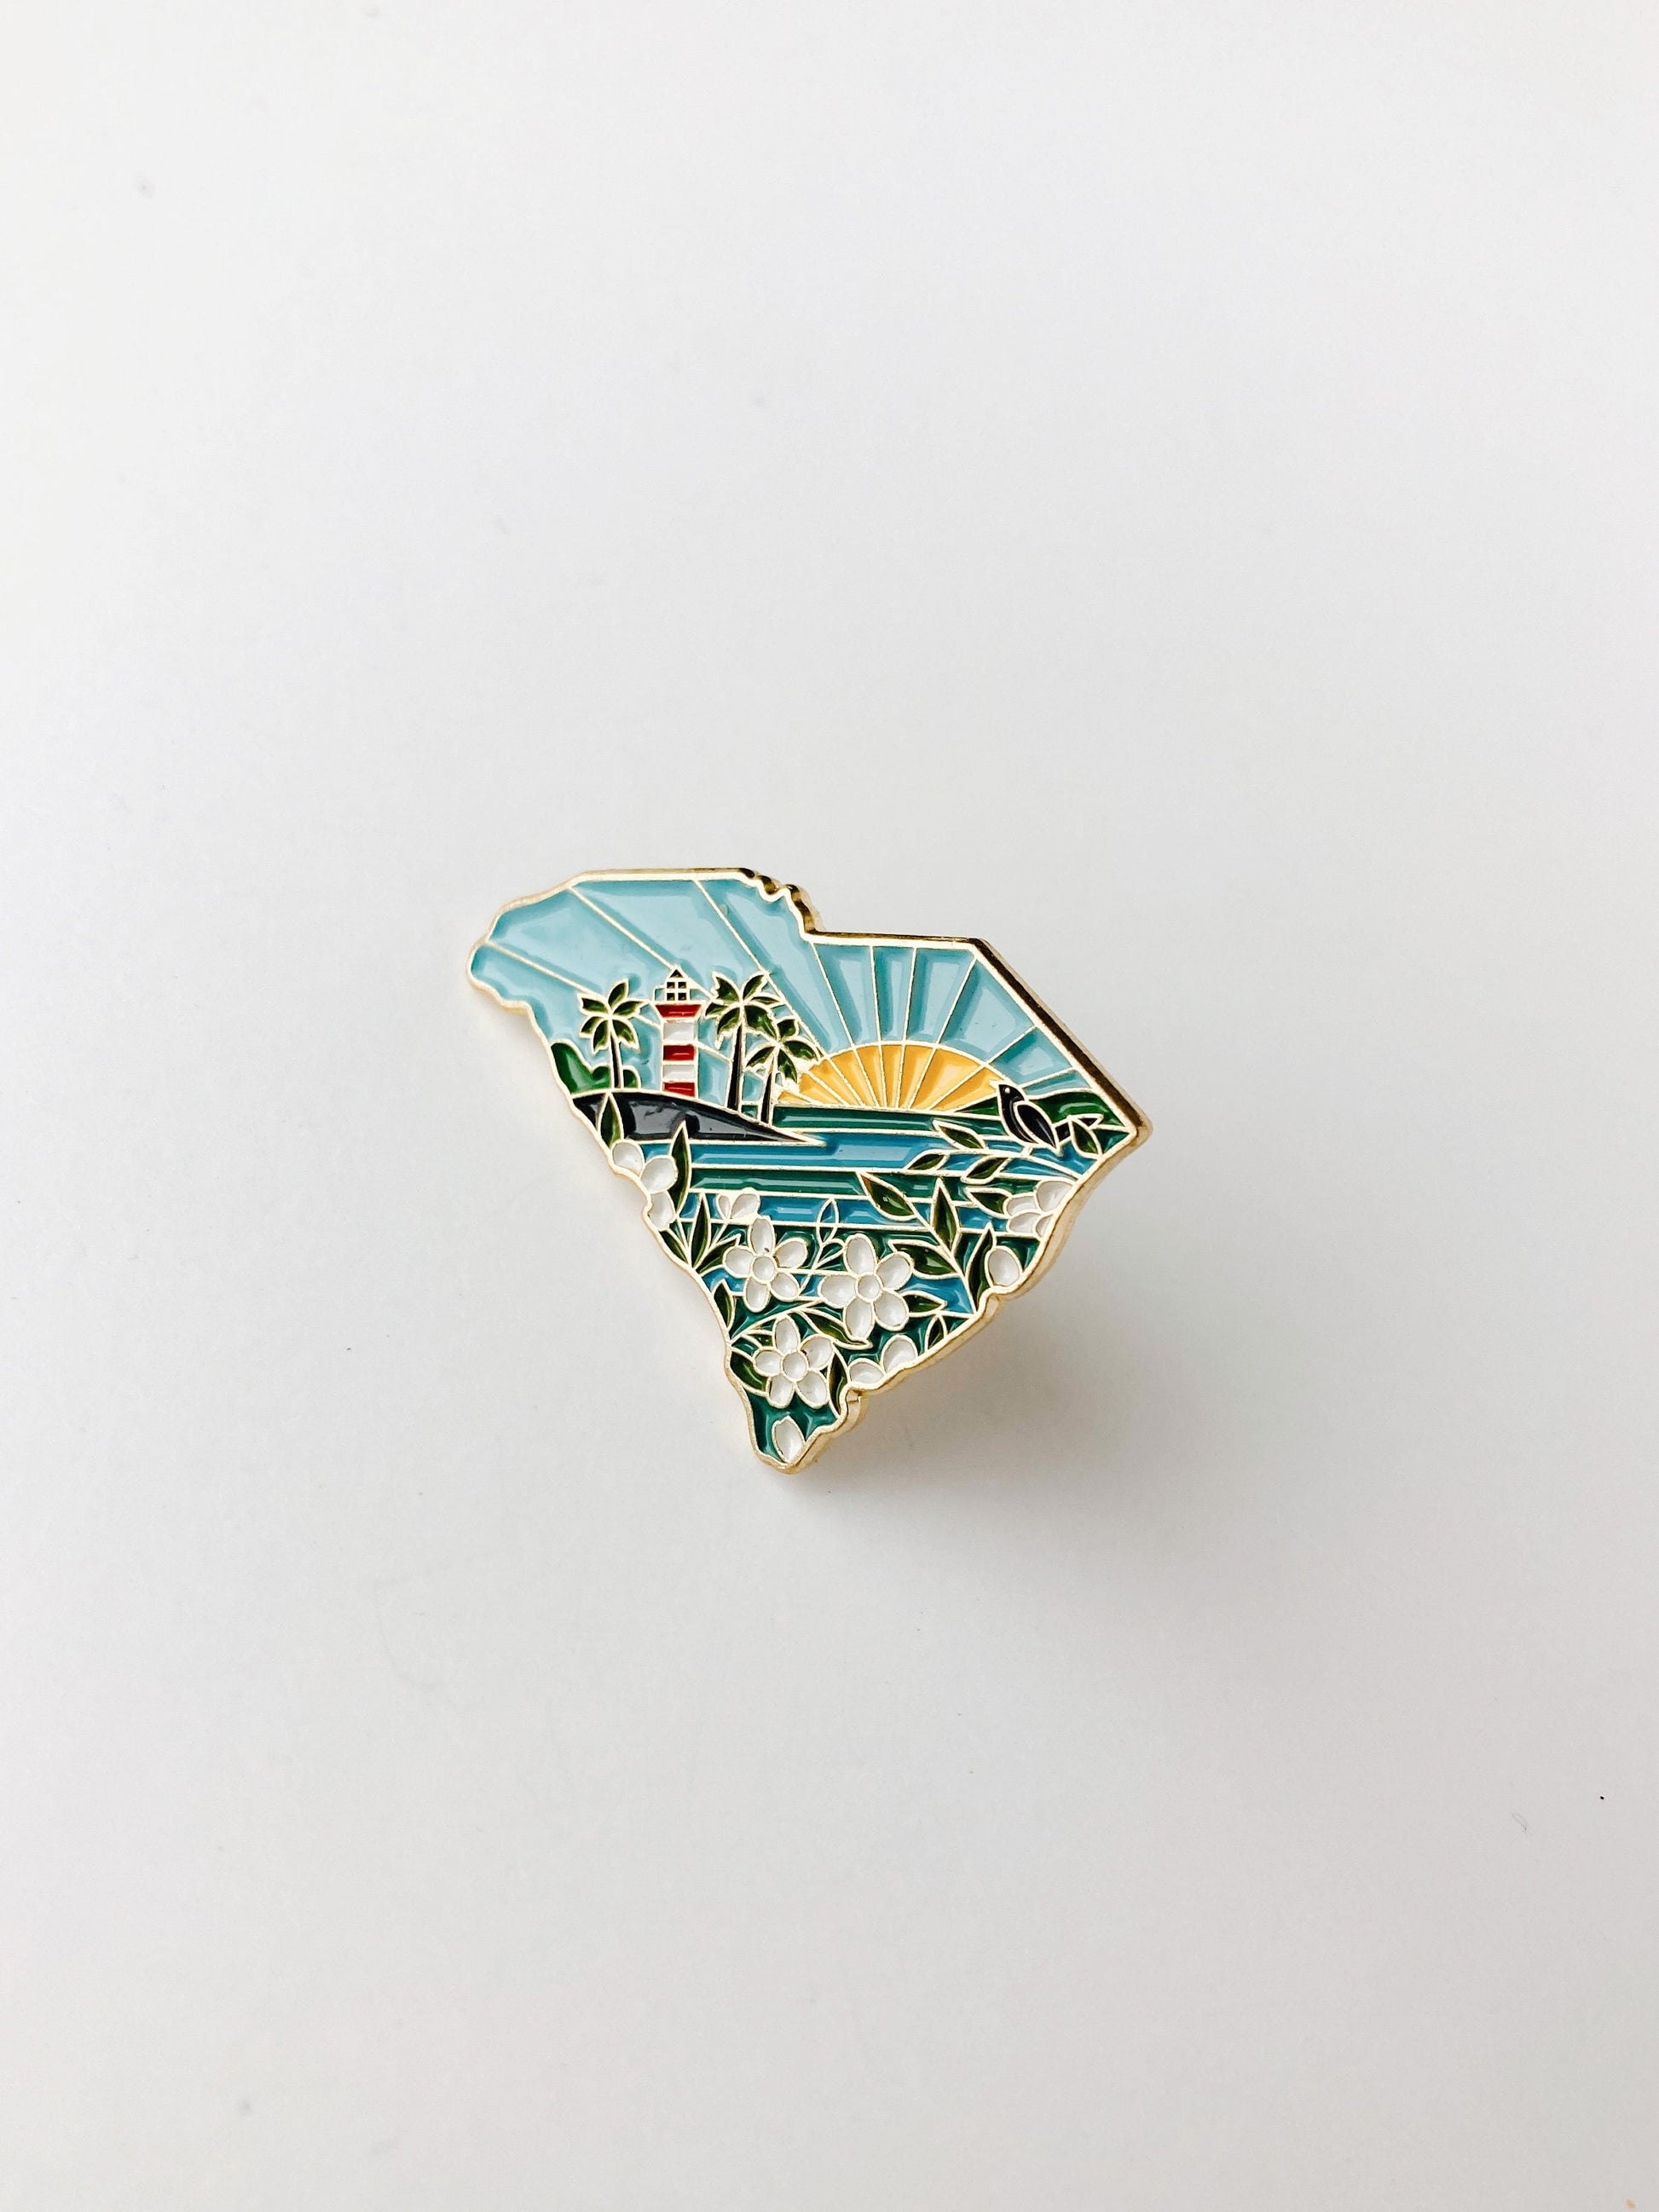 South Carolina Enamel Pin | Gold Soft Enamel Pin | Illustrated United States Pin | Butterfly Clasp | 1.25"